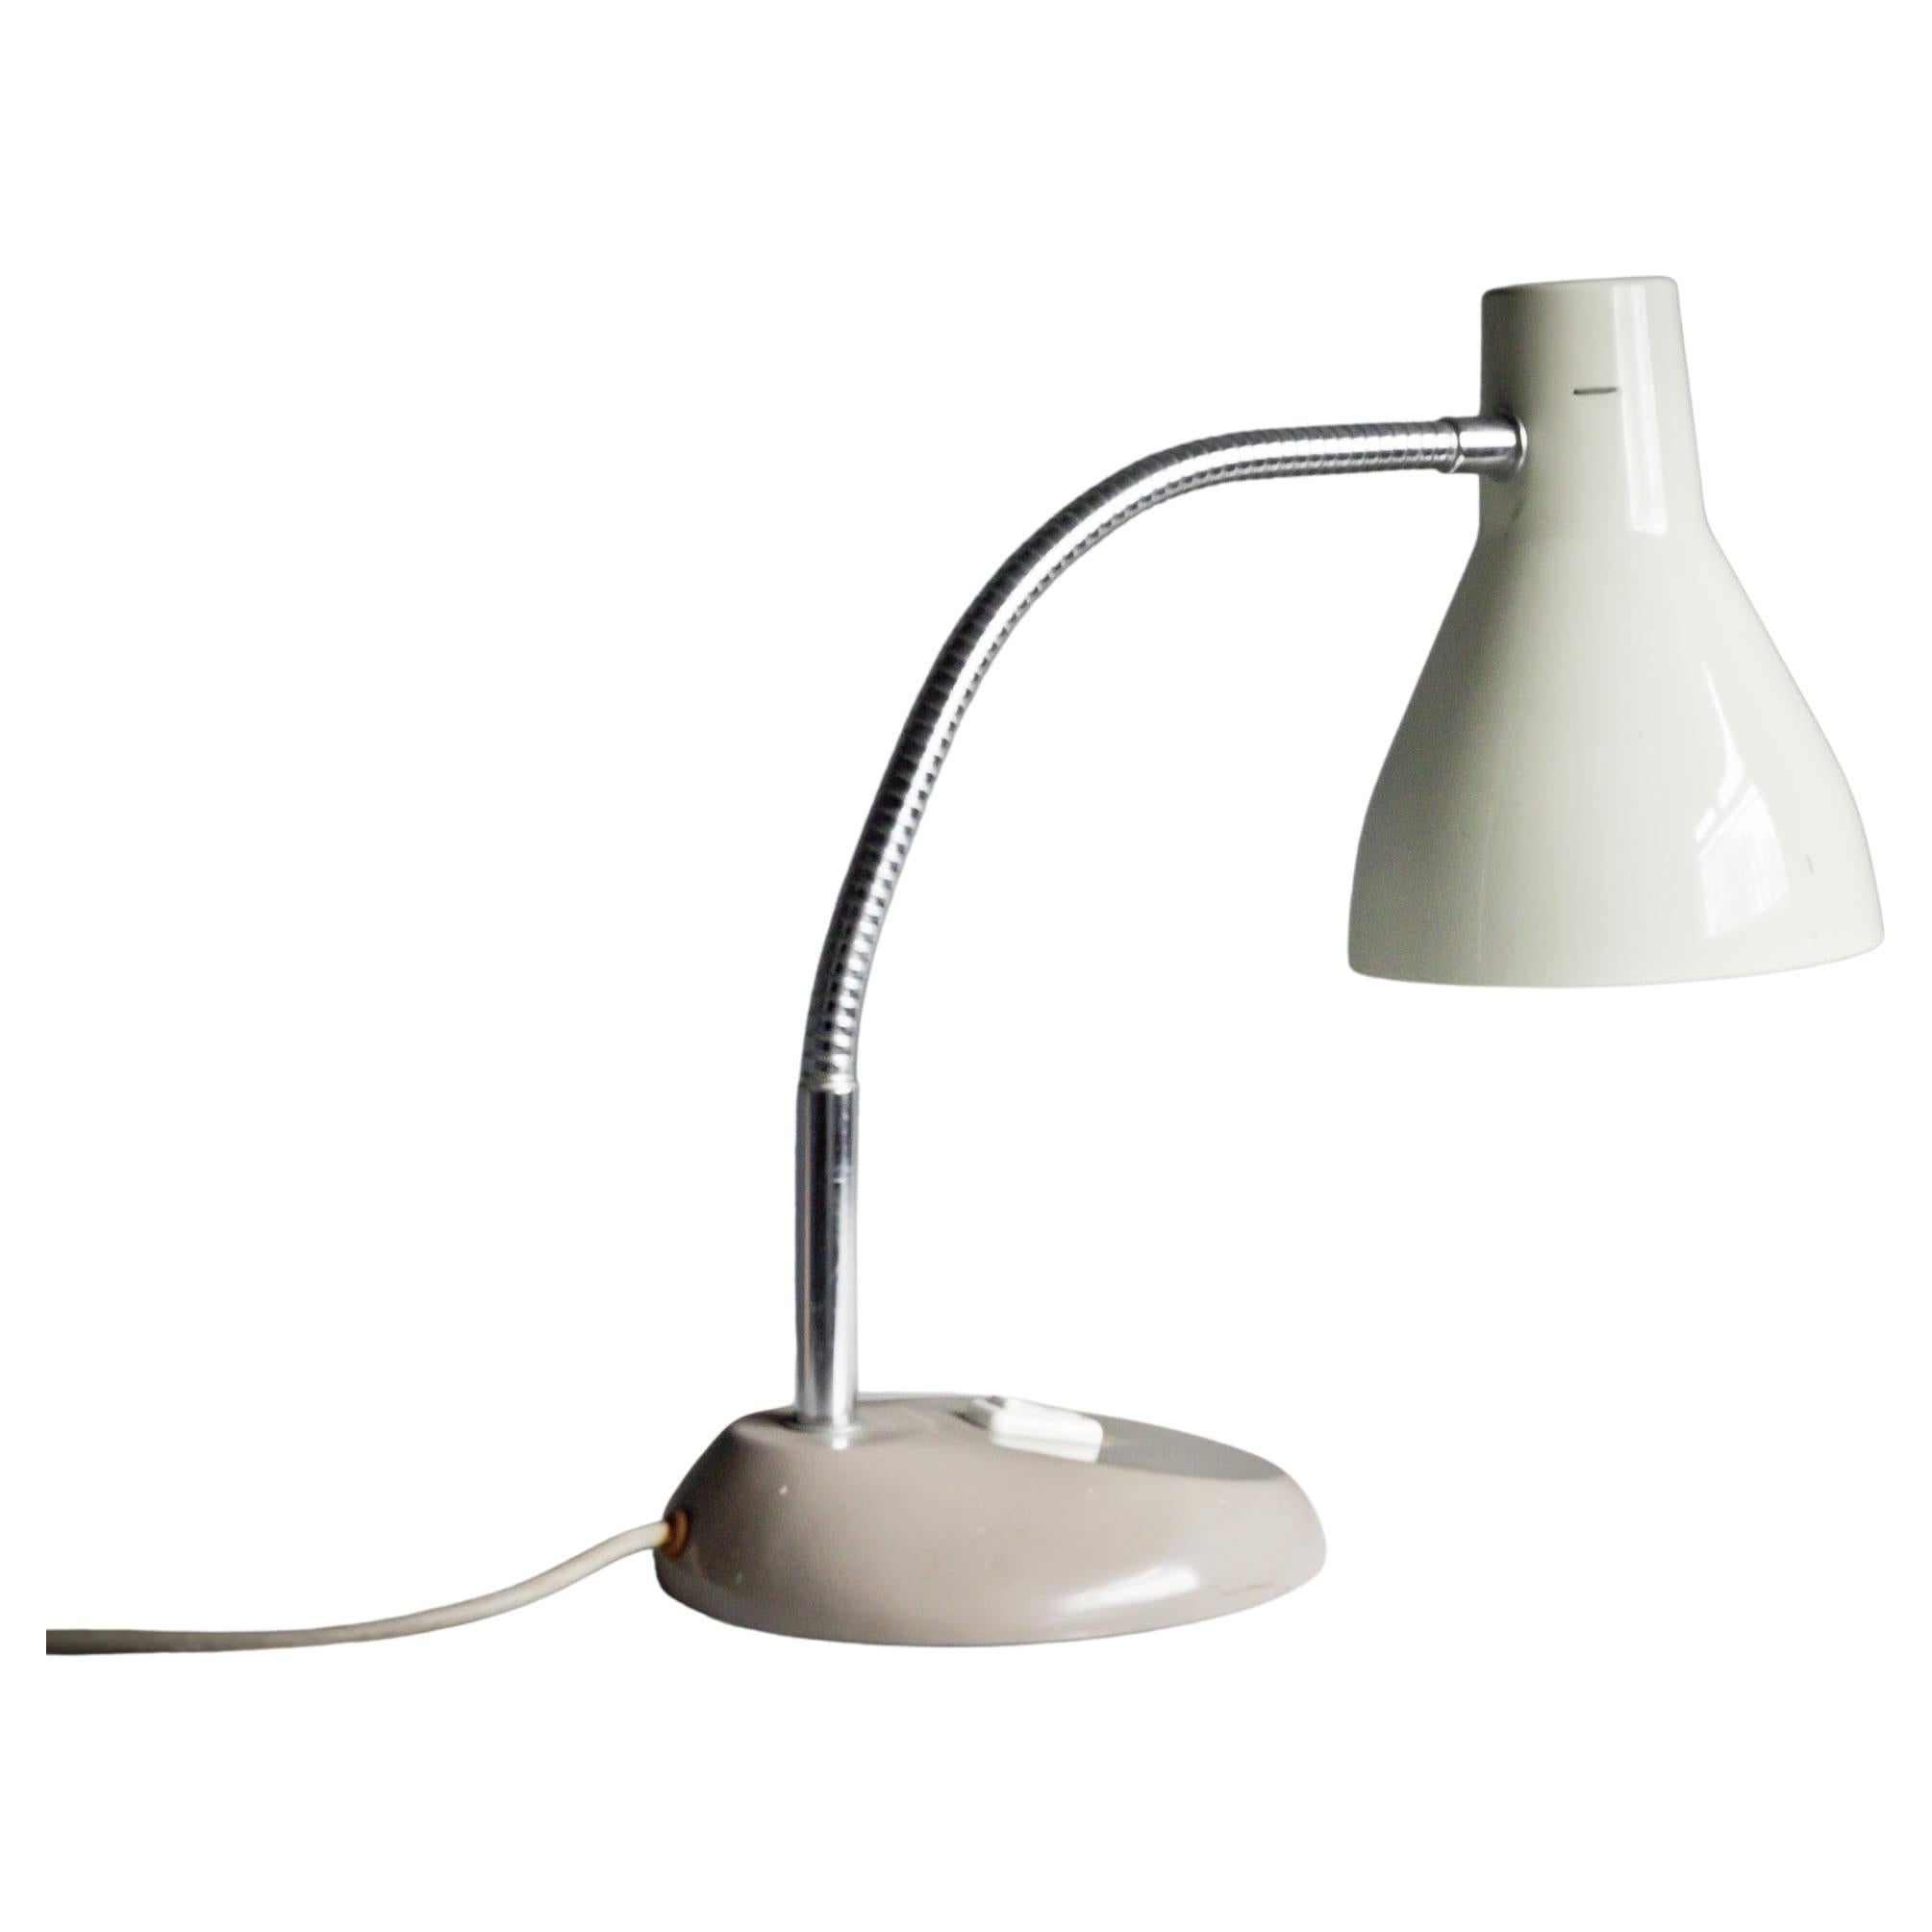 Herbet Terry 1960s Articulated Arm Desk Lamp For Sale